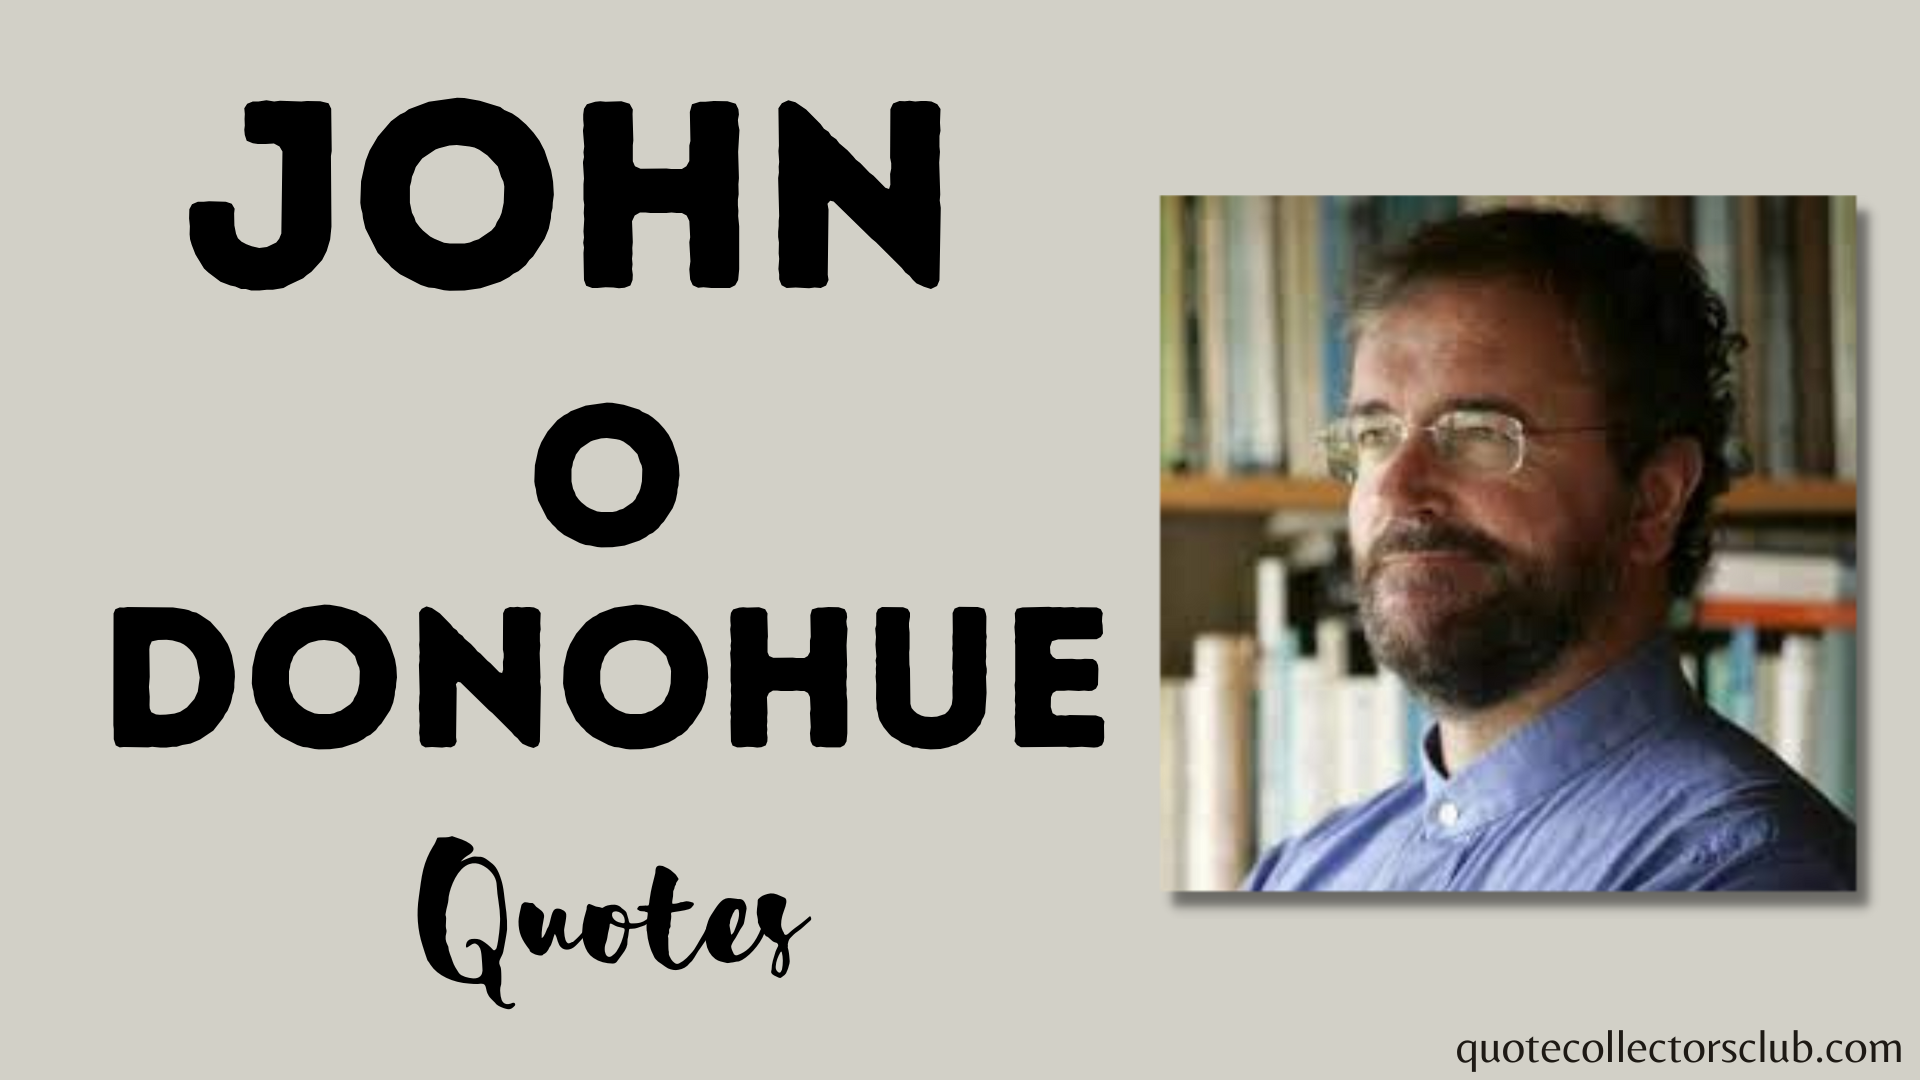 John o Donohue Quotes: The Best of the Irish Poet and Author